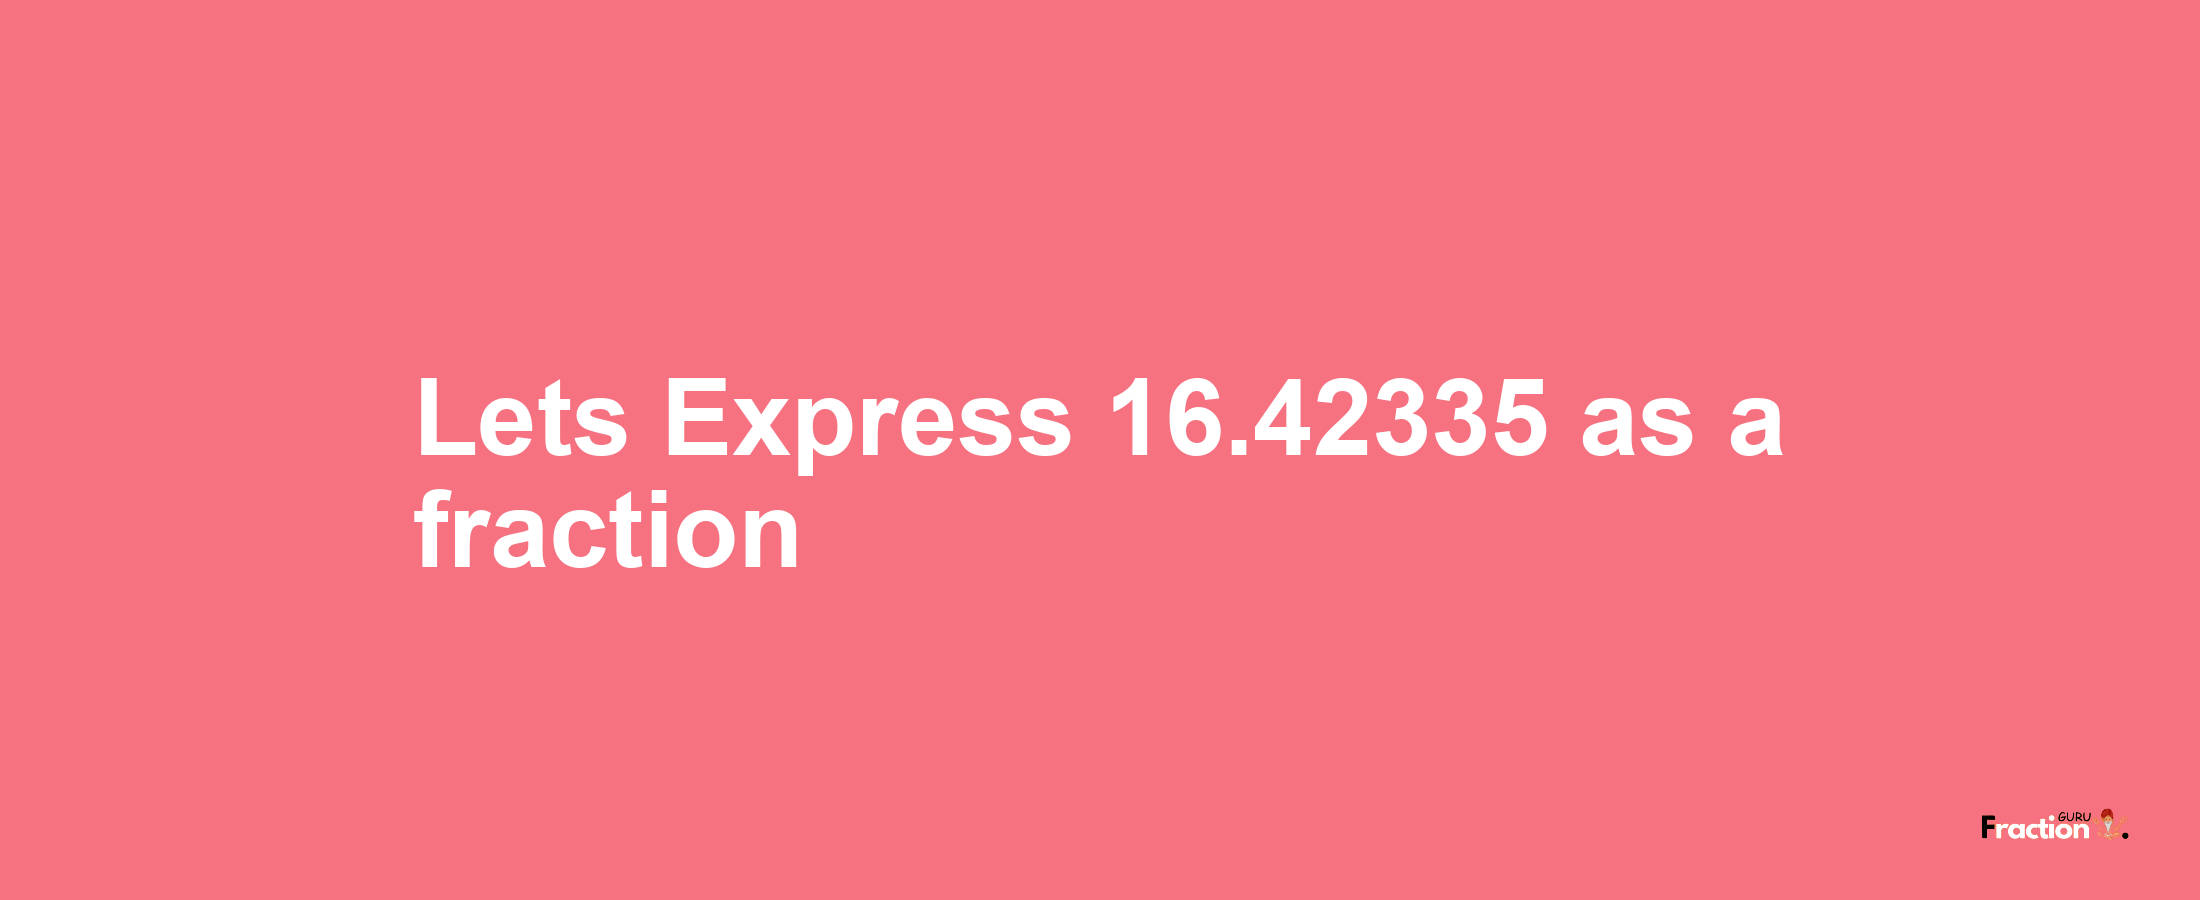 Lets Express 16.42335 as afraction